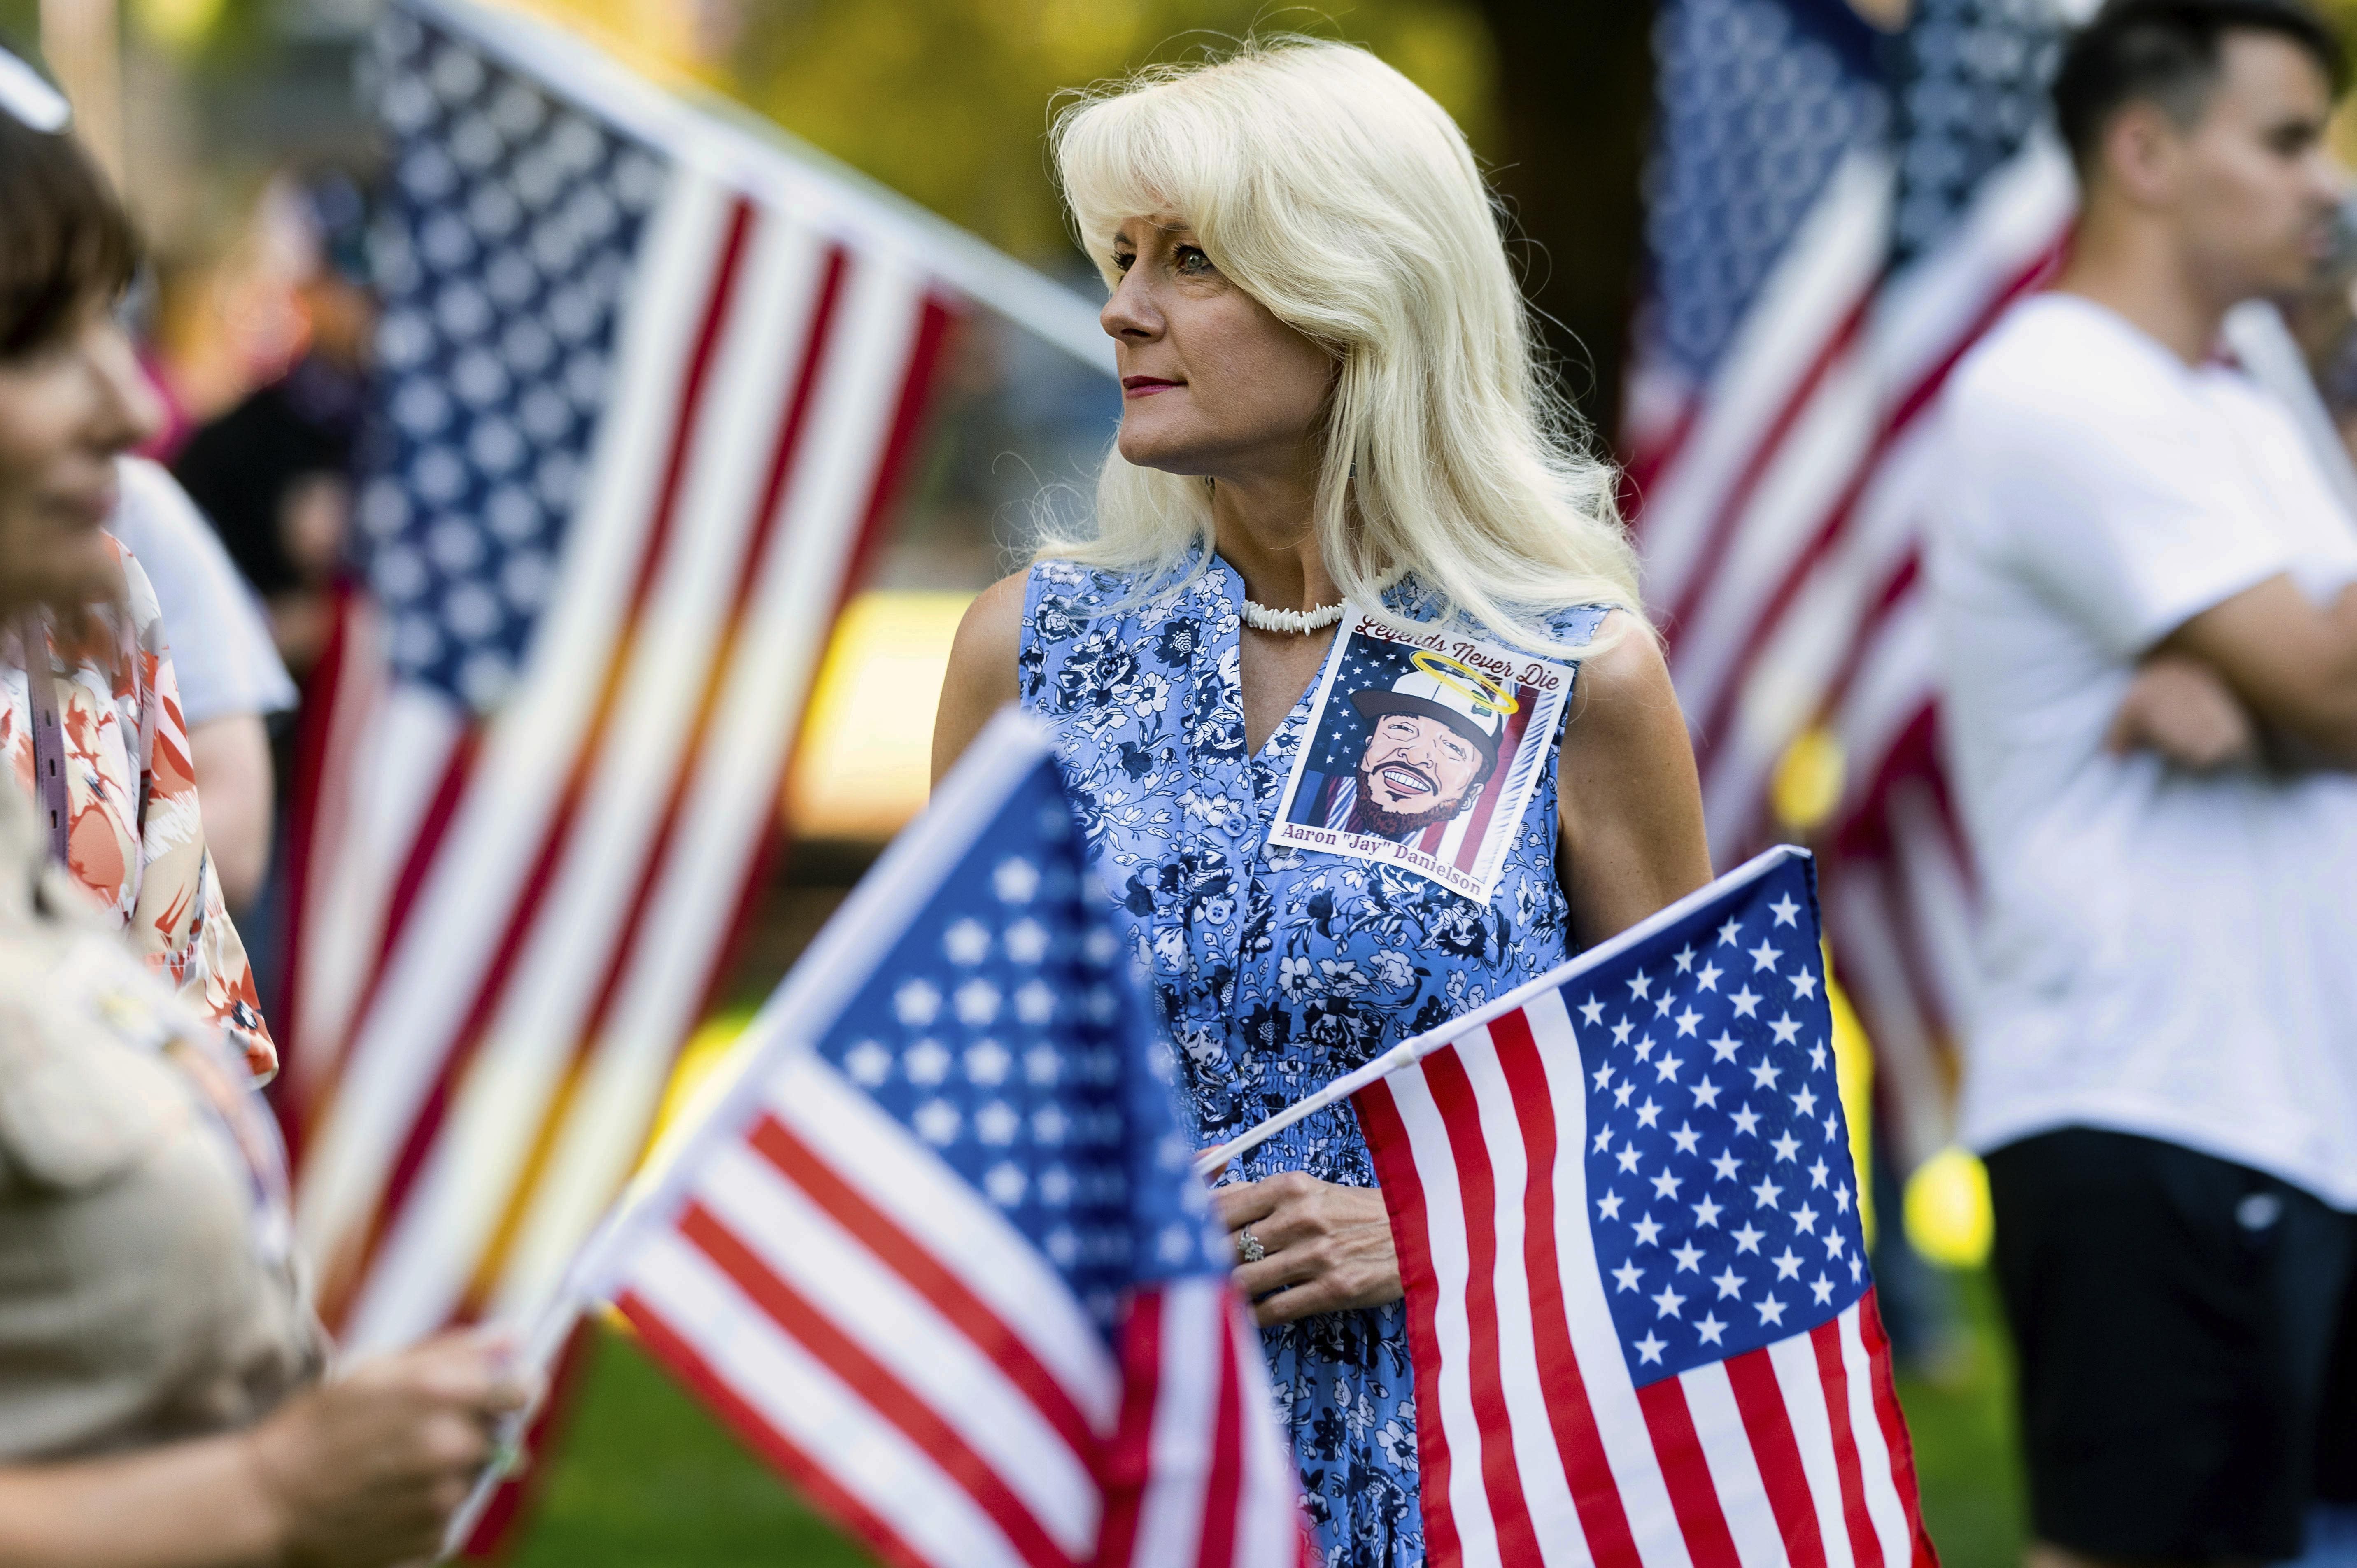 A woman wears an image of Aaron J. Danielson during a memorial for him on Saturday, Sept. 5, 2020, in Vancouver, Wash. Danielson, a supporter of the conservative group Patriot Prayer, was fatally shot in August as supporters of President Donald Trump and Black Lives Matter protesters clashed in Portland, Ore. (AP Photo/Noah Berger)